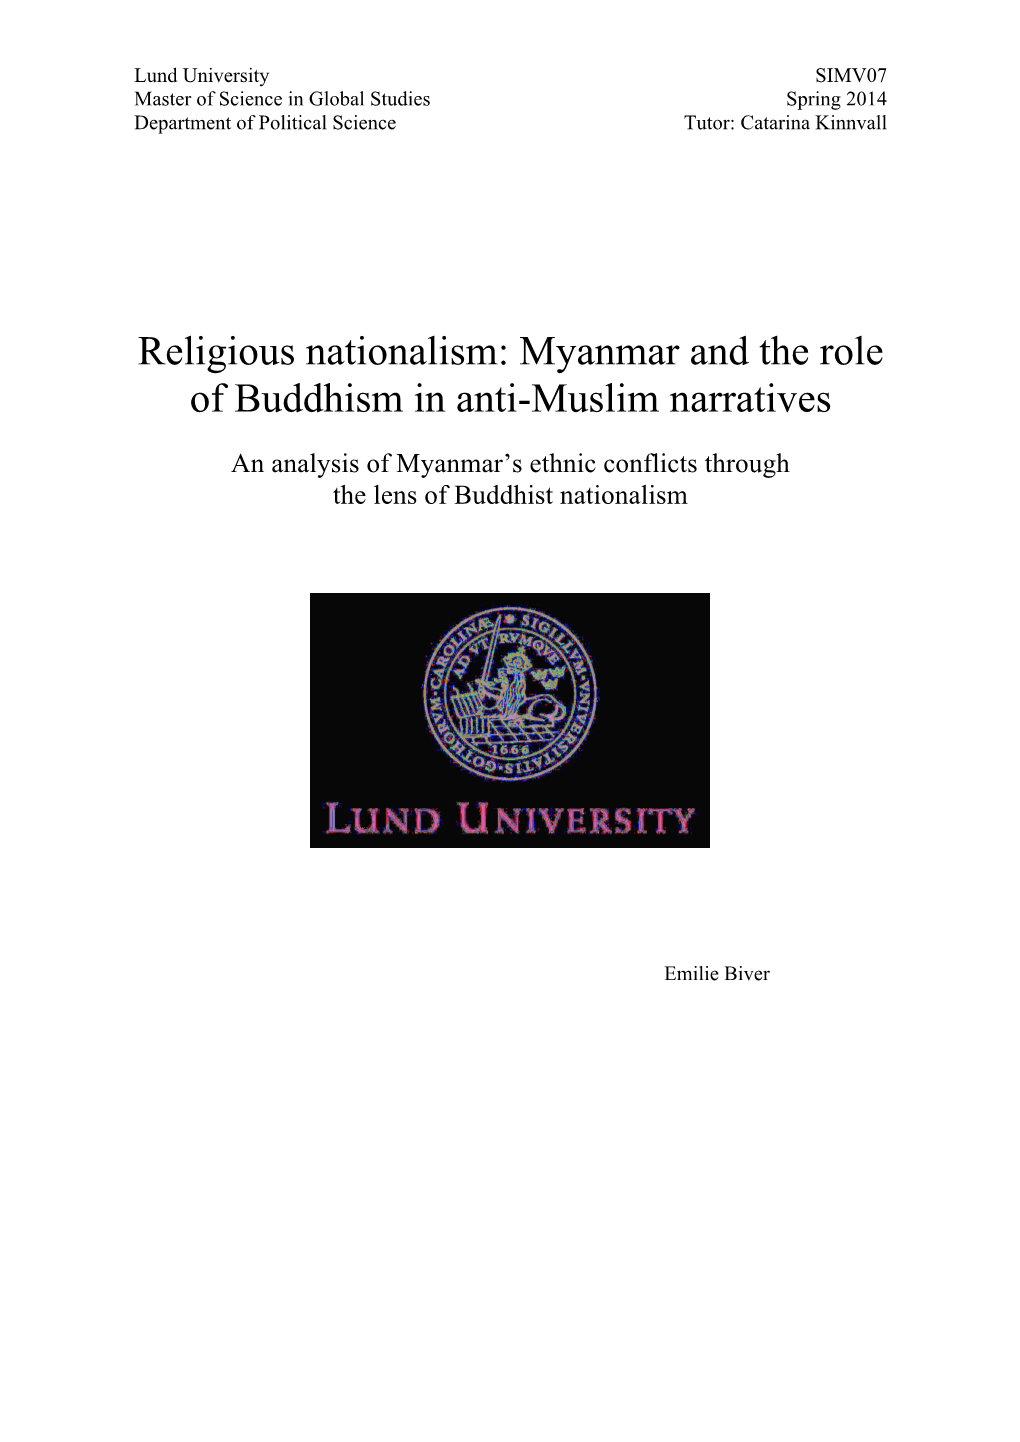 Religious Nationalism: Myanmar and the Role of Buddhism in Anti-Muslim Narratives